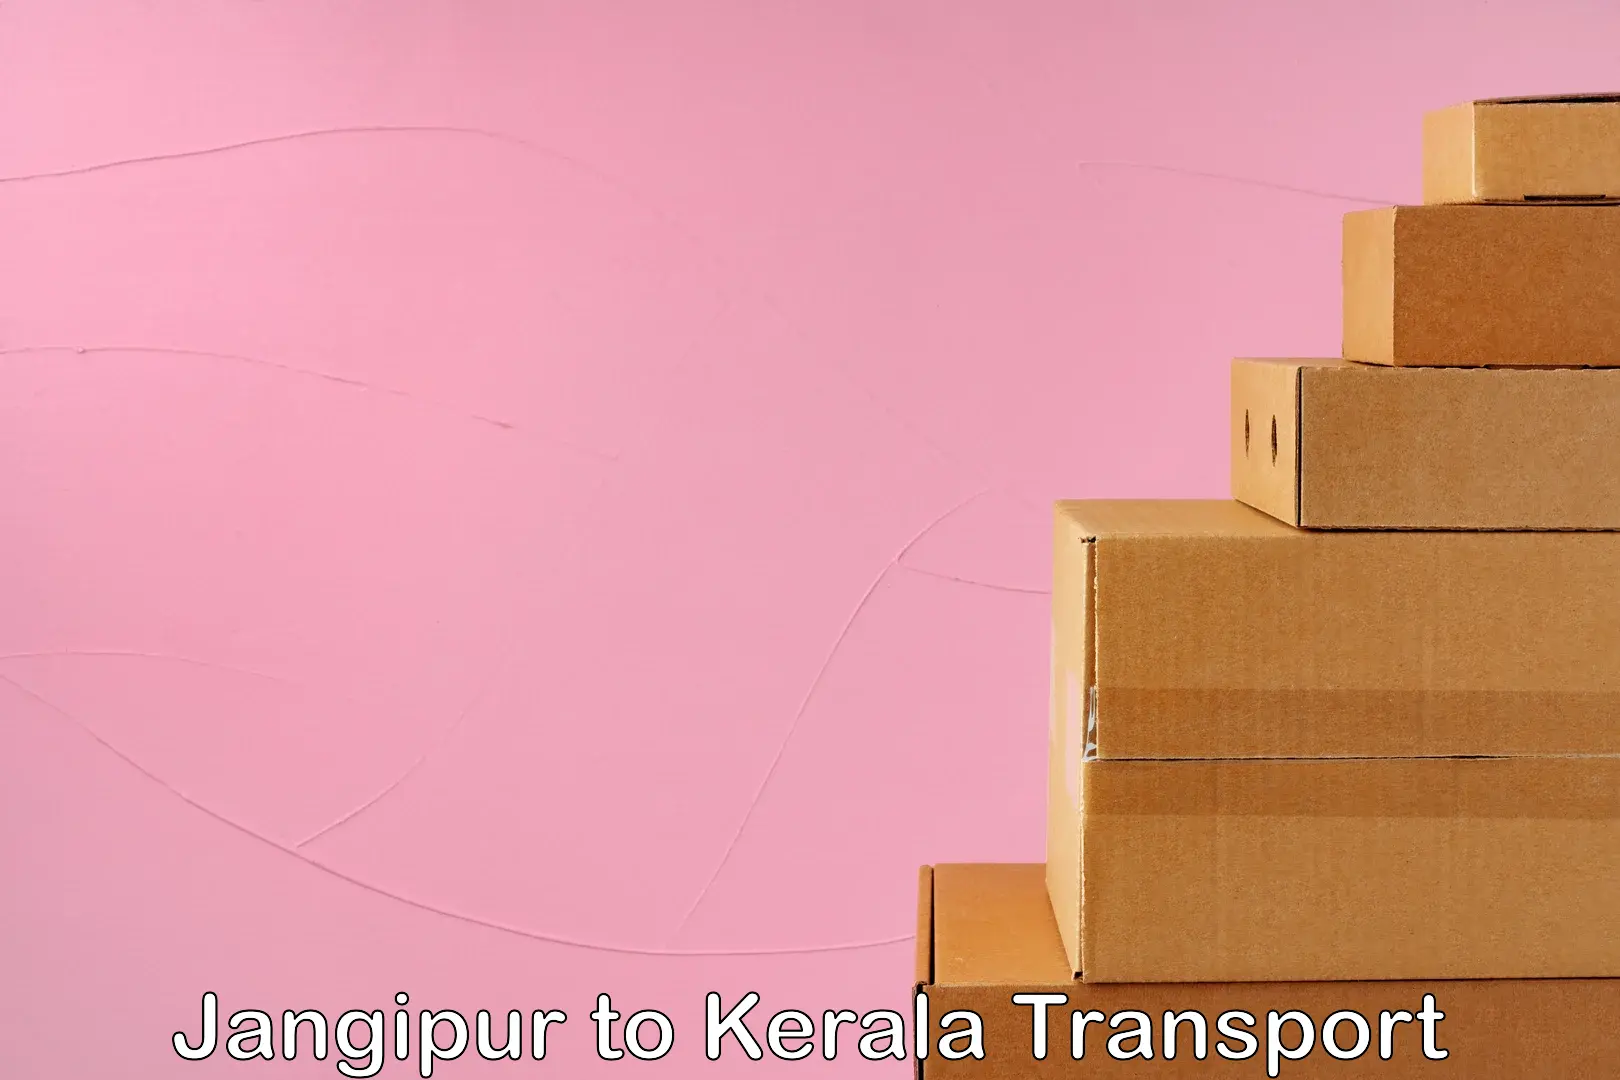 Truck transport companies in India Jangipur to Parappa